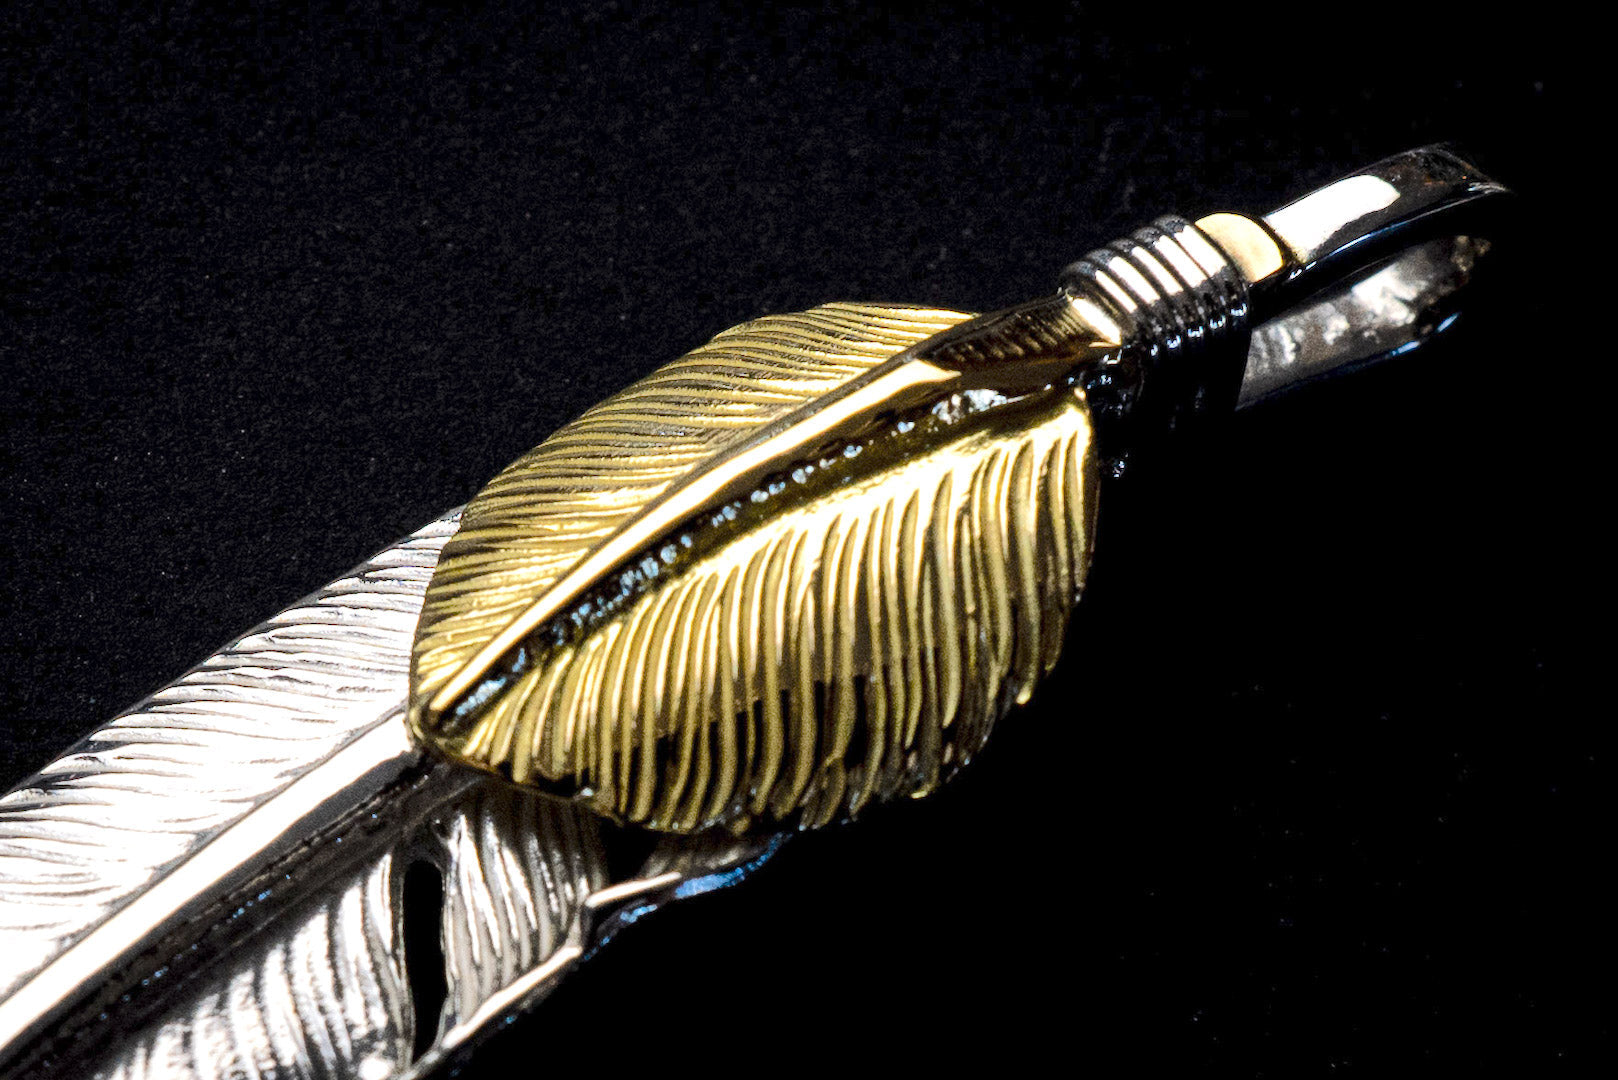 First Arrow's Medium Feather With 18K Gold "Heart Feather" Pendant (P-514)